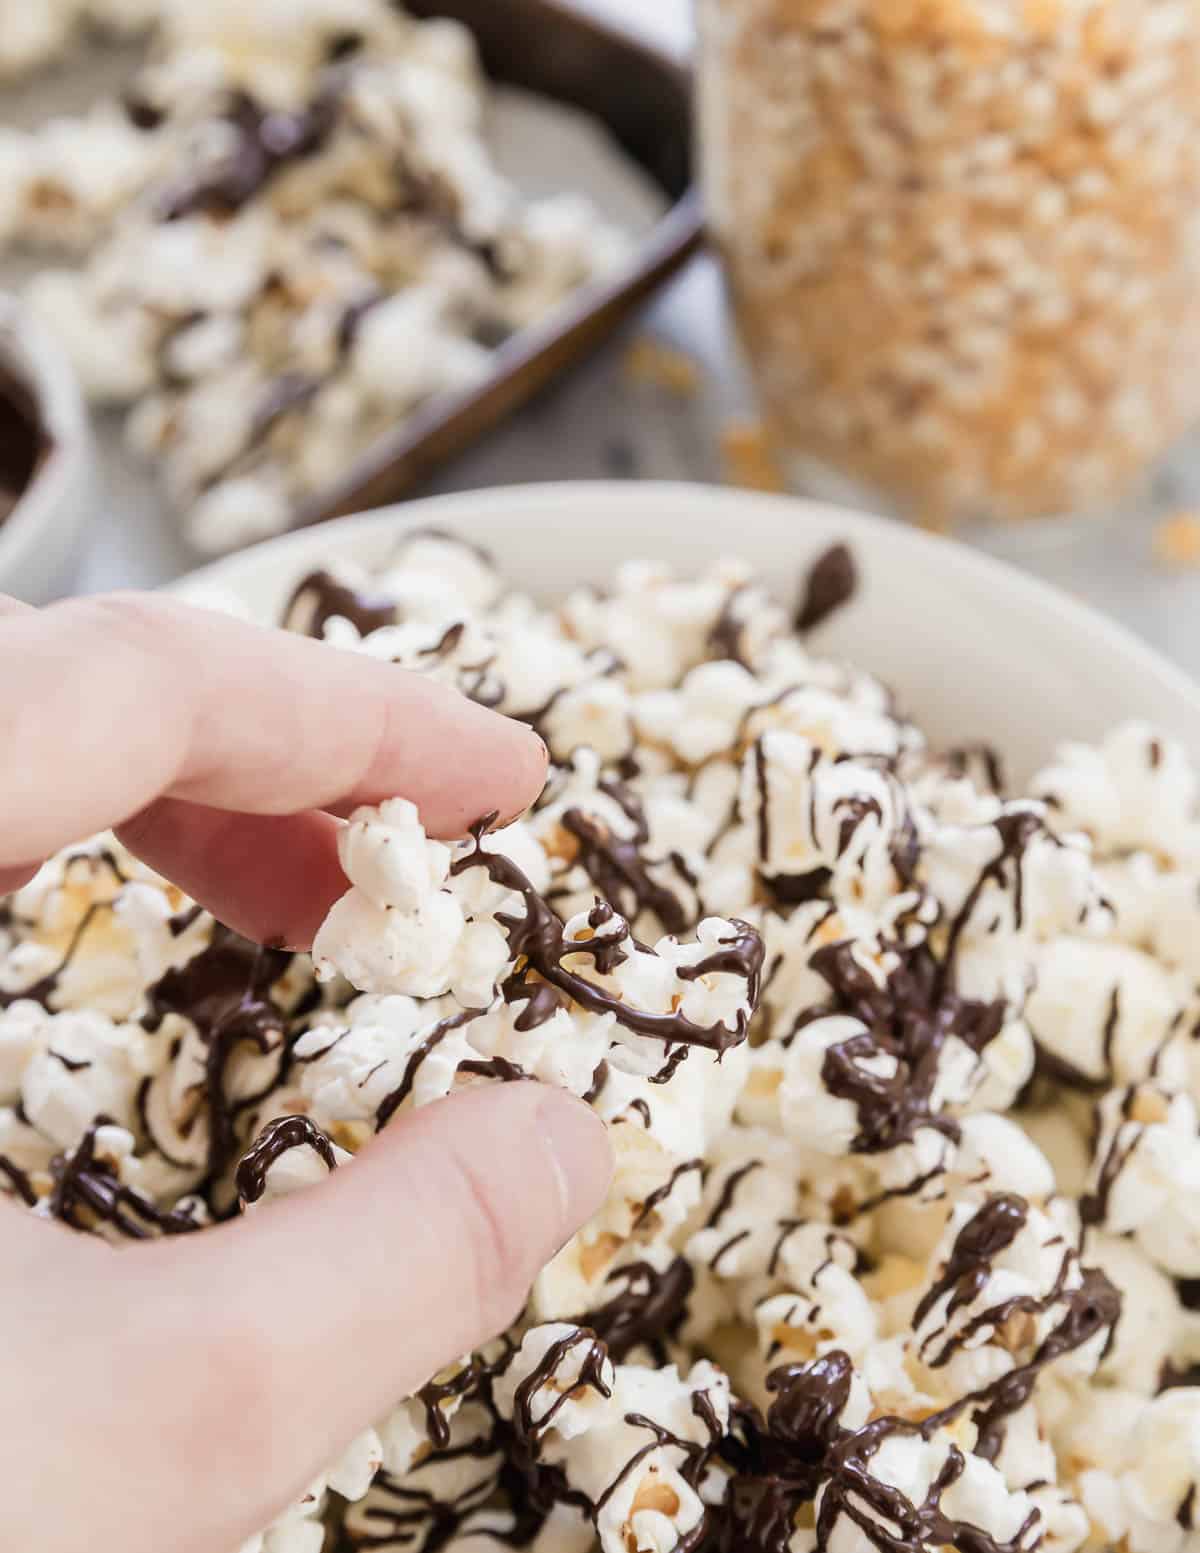 A person is dipping a hand into a bowl of popcorn with chocolate drizzle.